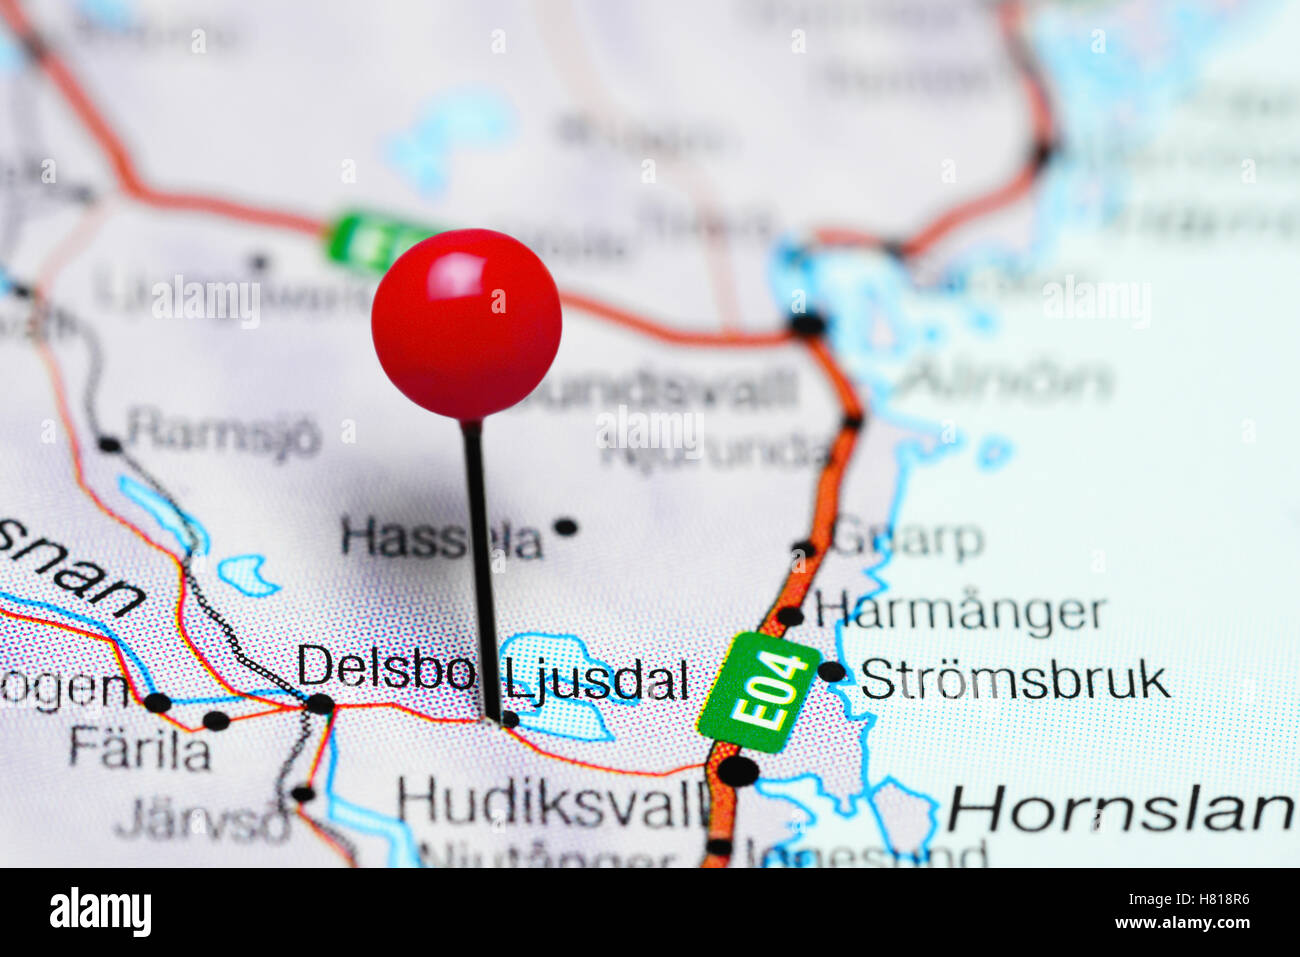 Ljusdal pinned on a map of Sweden Stock Photo